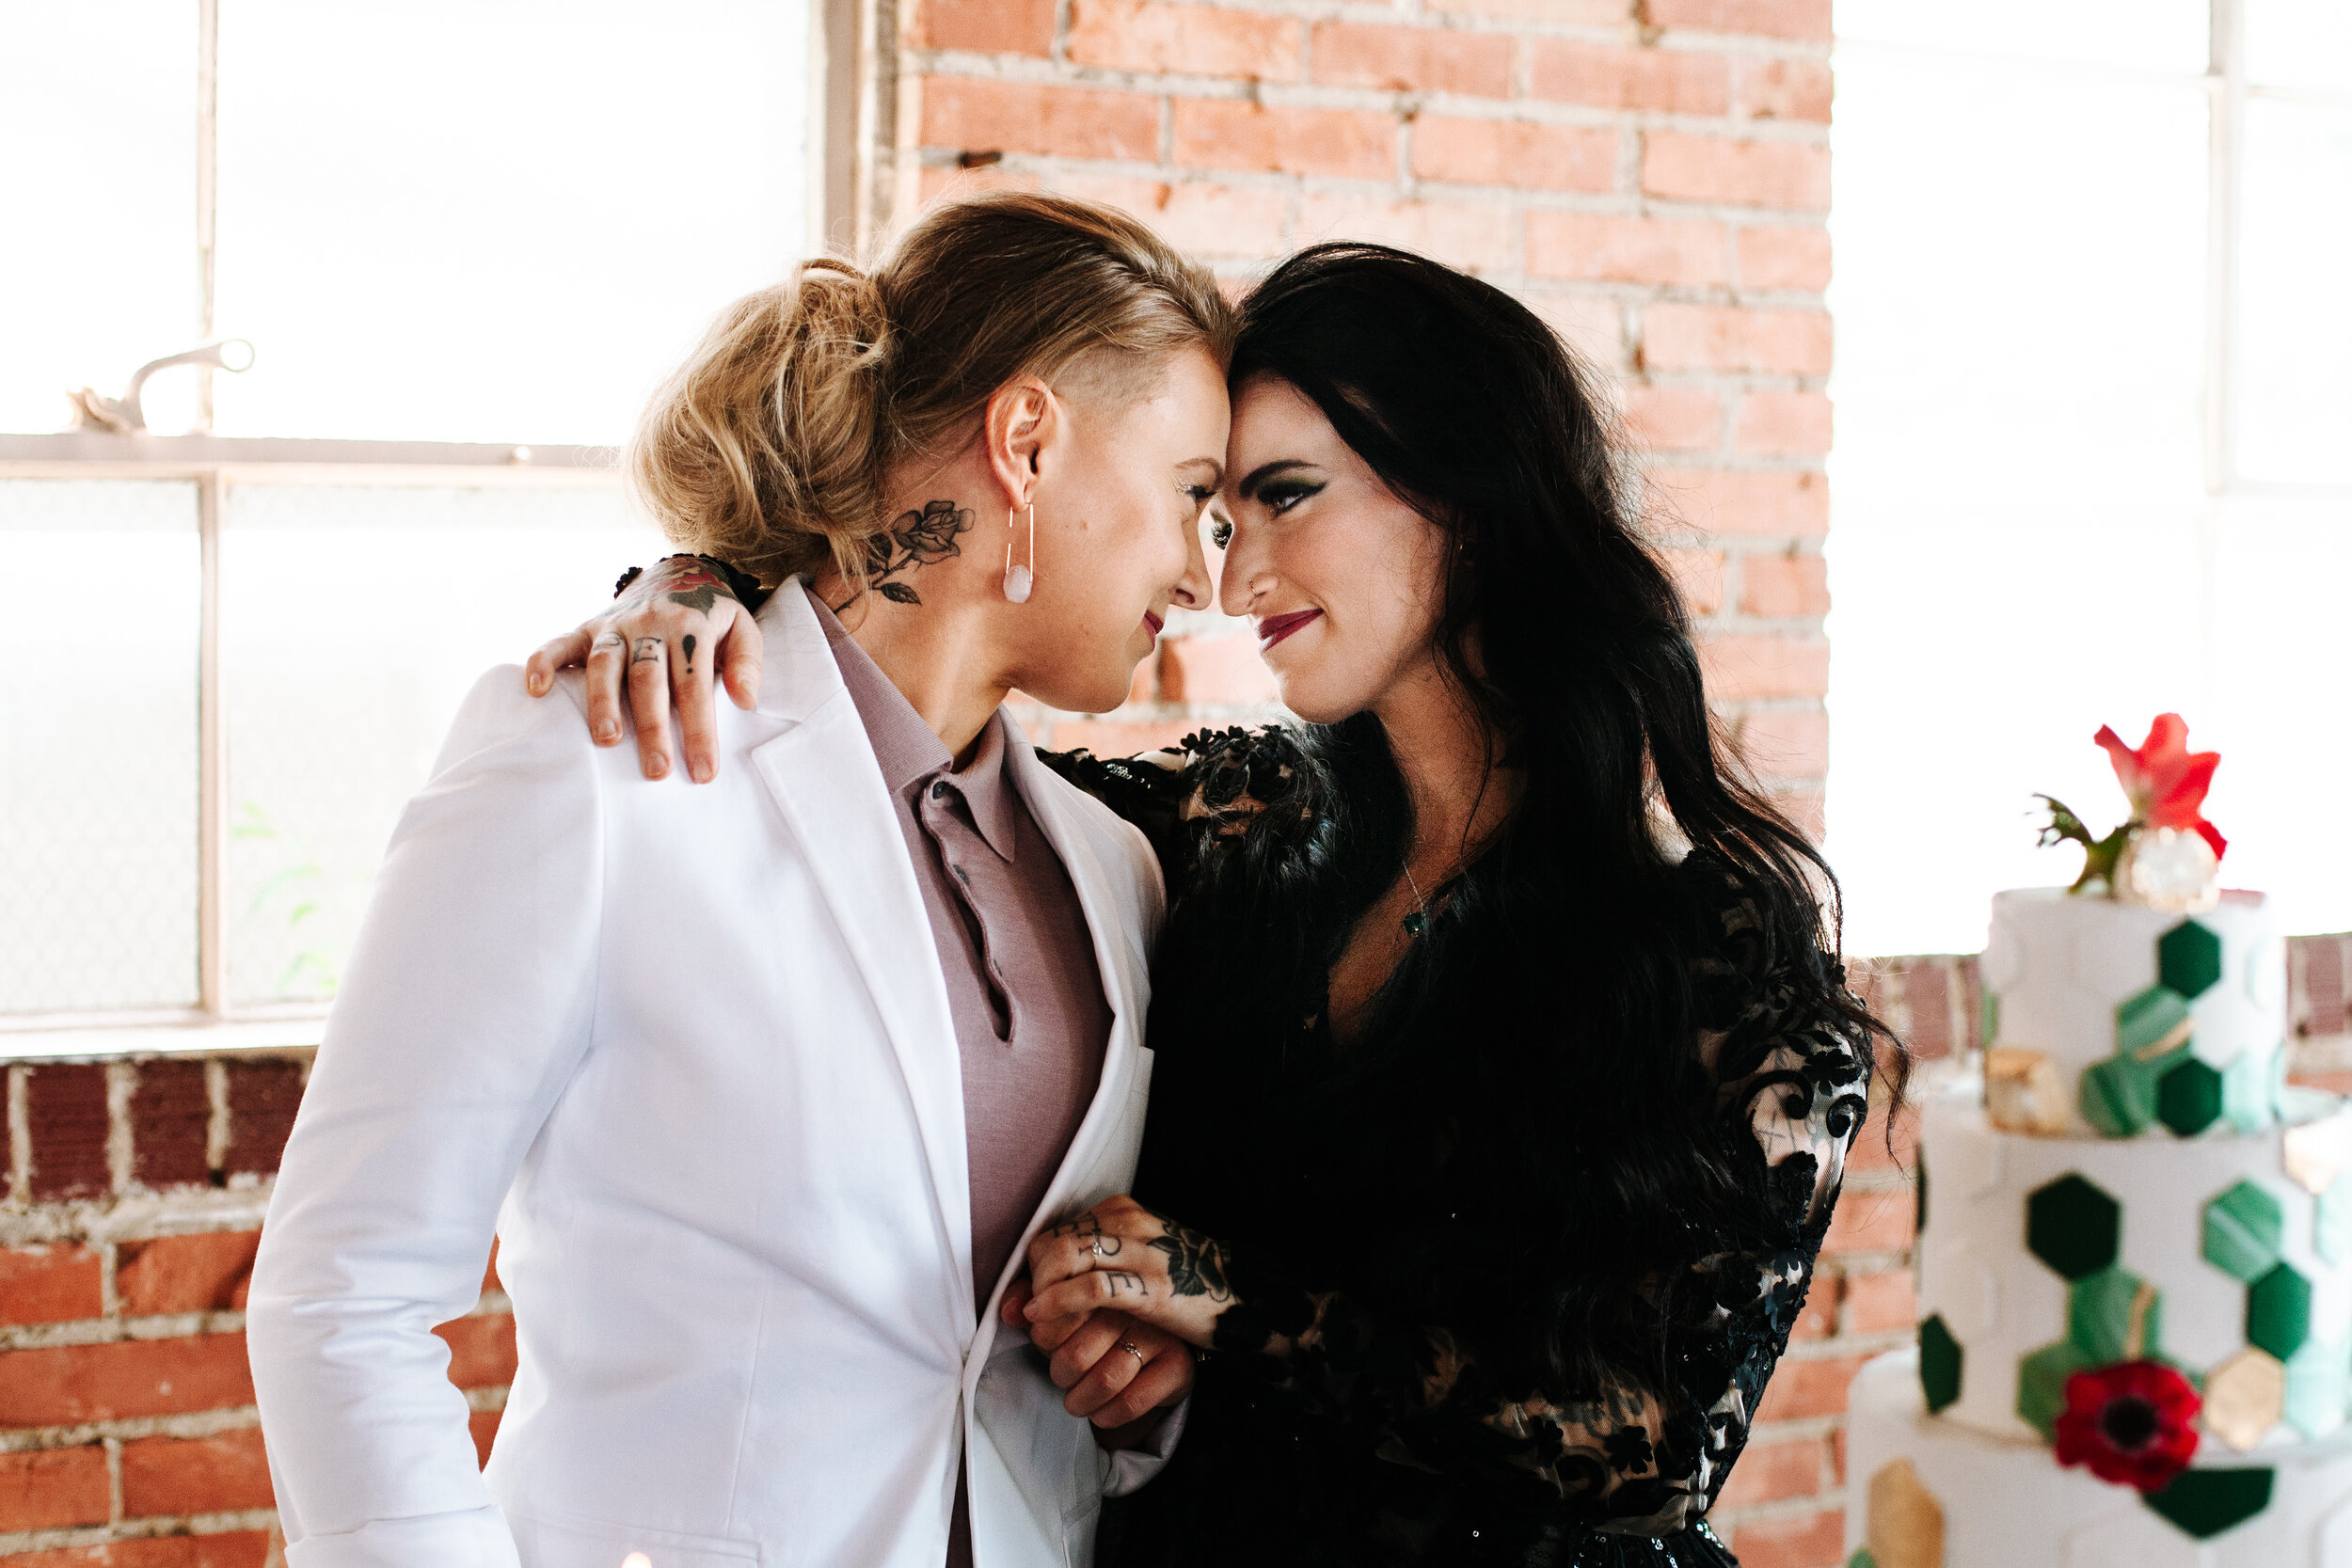 Lesbian brides at their wedding looking at each other lovingly, their foreheads are touching. 